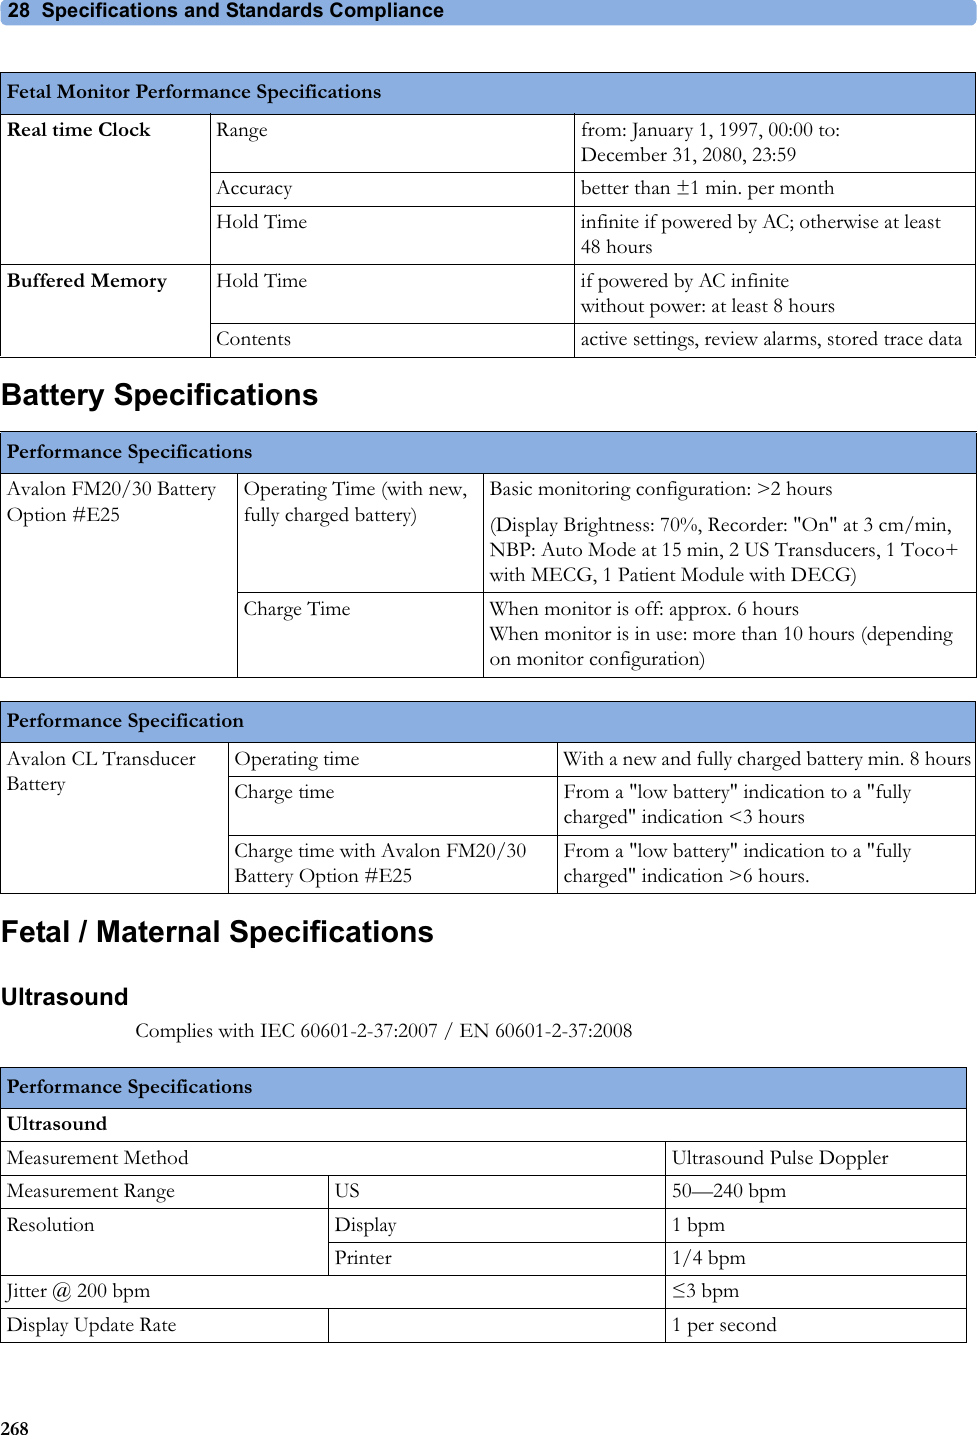 28  Specifications and Standards Compliance268Battery SpecificationsFetal / Maternal SpecificationsUltrasoundComplies with IEC 60601-2-37:2007 / EN 60601-2-37:2008Real time Clock Range from: January 1, 1997, 00:00 to: December 31, 2080, 23:59Accuracy better than ±1 min. per monthHold Time infinite if powered by AC; otherwise at least 48 hoursBuffered Memory Hold Time if powered by AC infinite without power: at least 8 hoursContents active settings, review alarms, stored trace dataFetal Monitor Performance SpecificationsPerformance SpecificationsAvalon FM20/30 Battery Option #E25Operating Time (with new, fully charged battery)Basic monitoring configuration: &gt;2 hours(Display Brightness: 70%, Recorder: &quot;On&quot; at 3 cm/min, NBP: Auto Mode at 15 min, 2 US Transducers, 1 Toco+ with MECG, 1 Patient Module with DECG)Charge Time When monitor is off: approx. 6 hours When monitor is in use: more than 10 hours (depending on monitor configuration)Performance SpecificationAvalon CL Transducer BatteryOperating time With a new and fully charged battery min. 8 hoursCharge time From a &quot;low battery&quot; indication to a &quot;fully charged&quot; indication &lt;3 hoursCharge time with Avalon FM20/30 Battery Option #E25From a &quot;low battery&quot; indication to a &quot;fully charged&quot; indication &gt;6 hours.Performance SpecificationsUltrasoundMeasurement Method Ultrasound Pulse DopplerMeasurement Range US 50—240 bpmResolution Display 1 bpmPrinter 1/4 bpmJitter @ 200 bpm  3 bpmDisplay Update Rate 1 per second